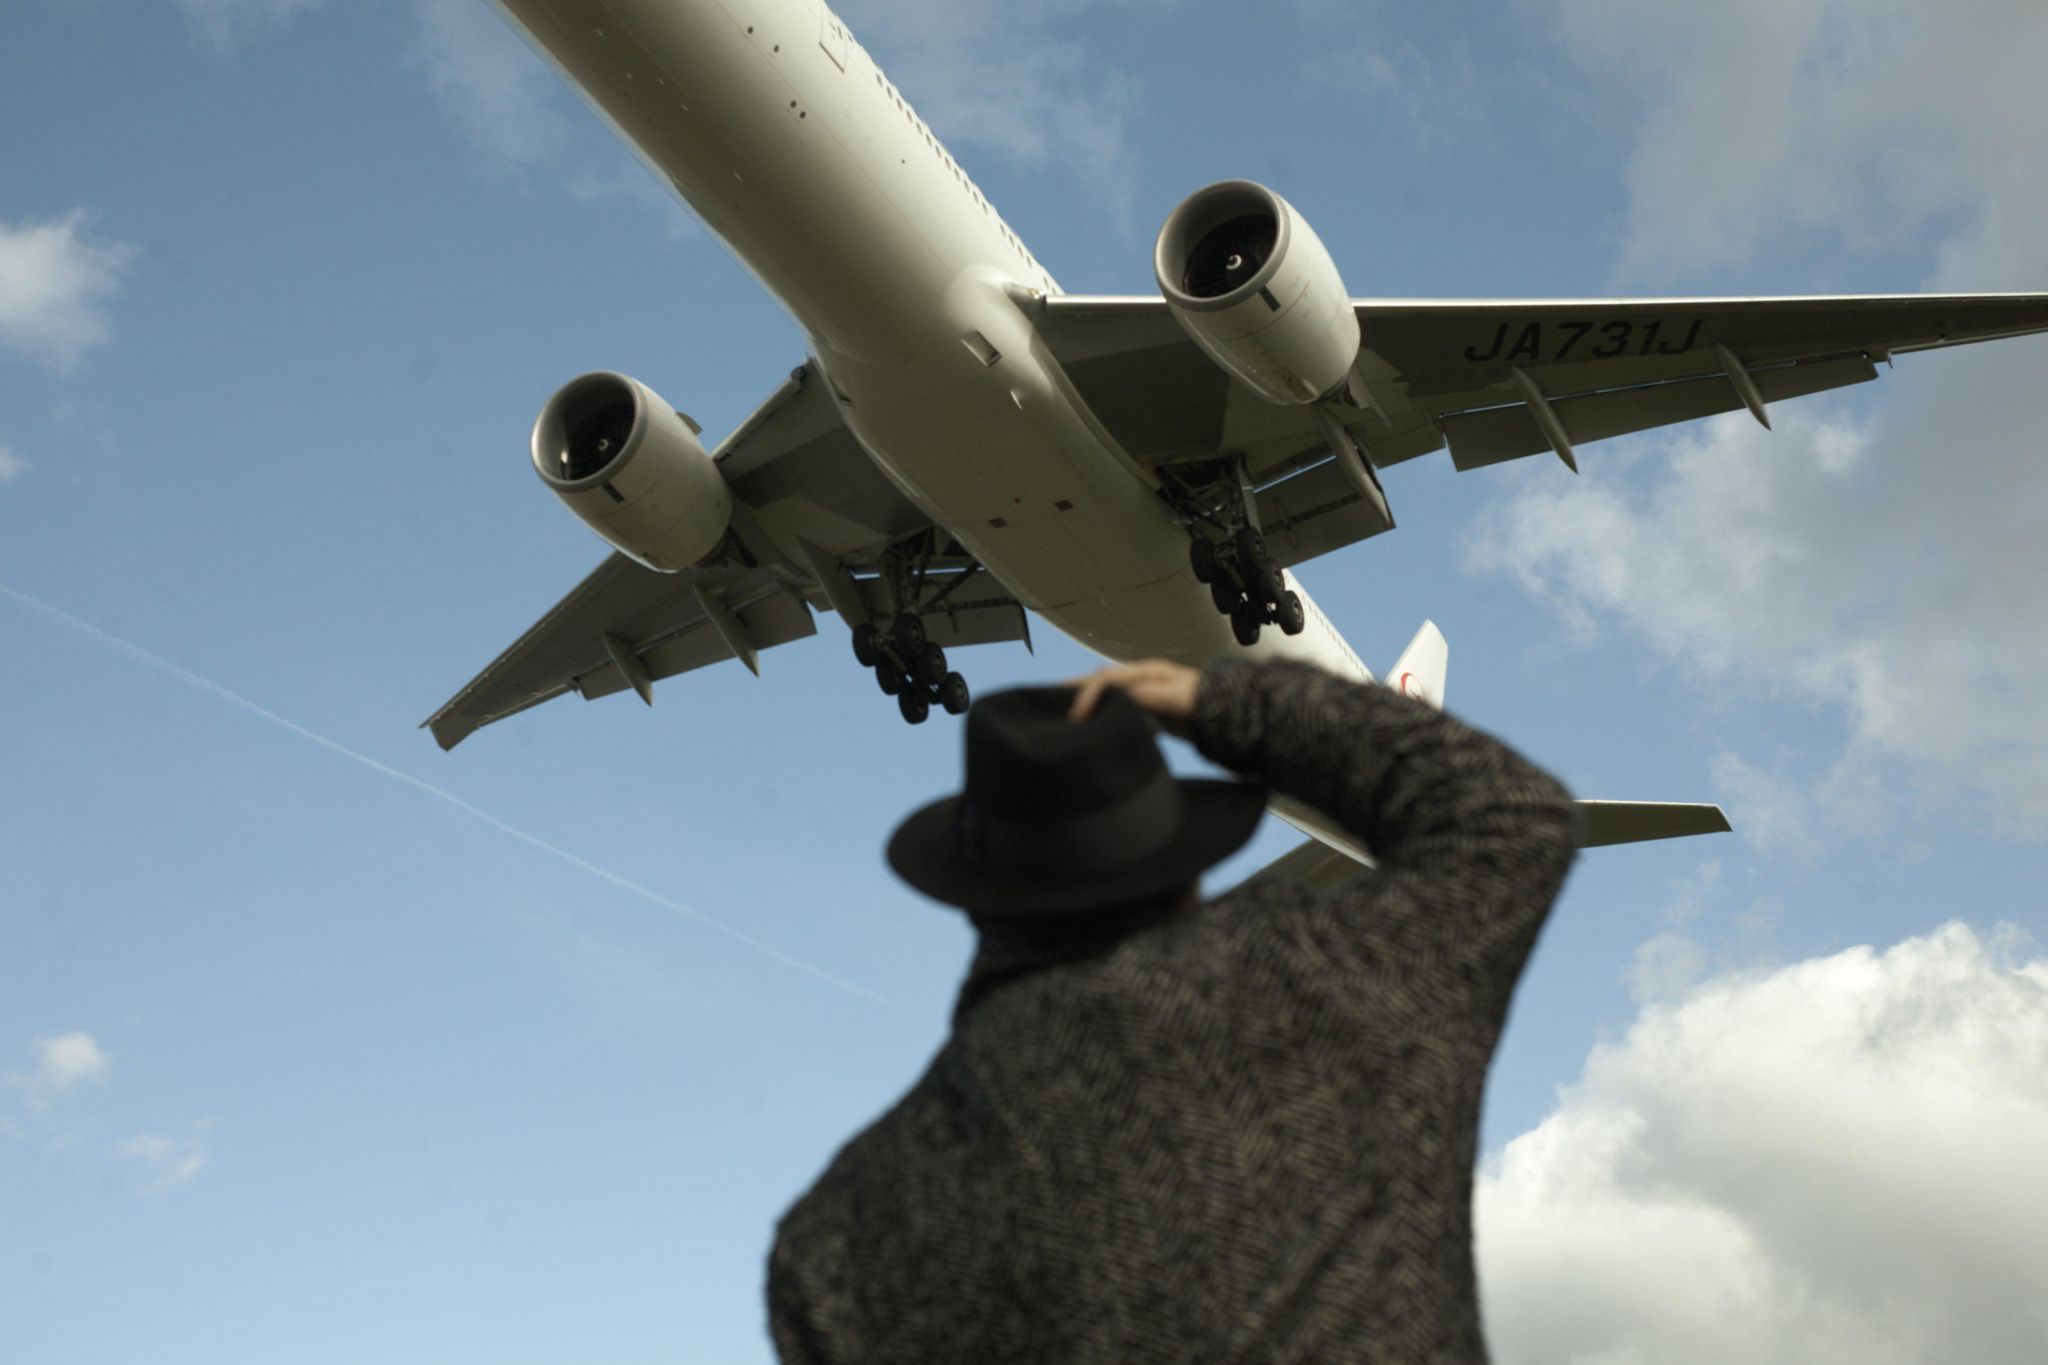 Man holds onto hat as plane flies overhead